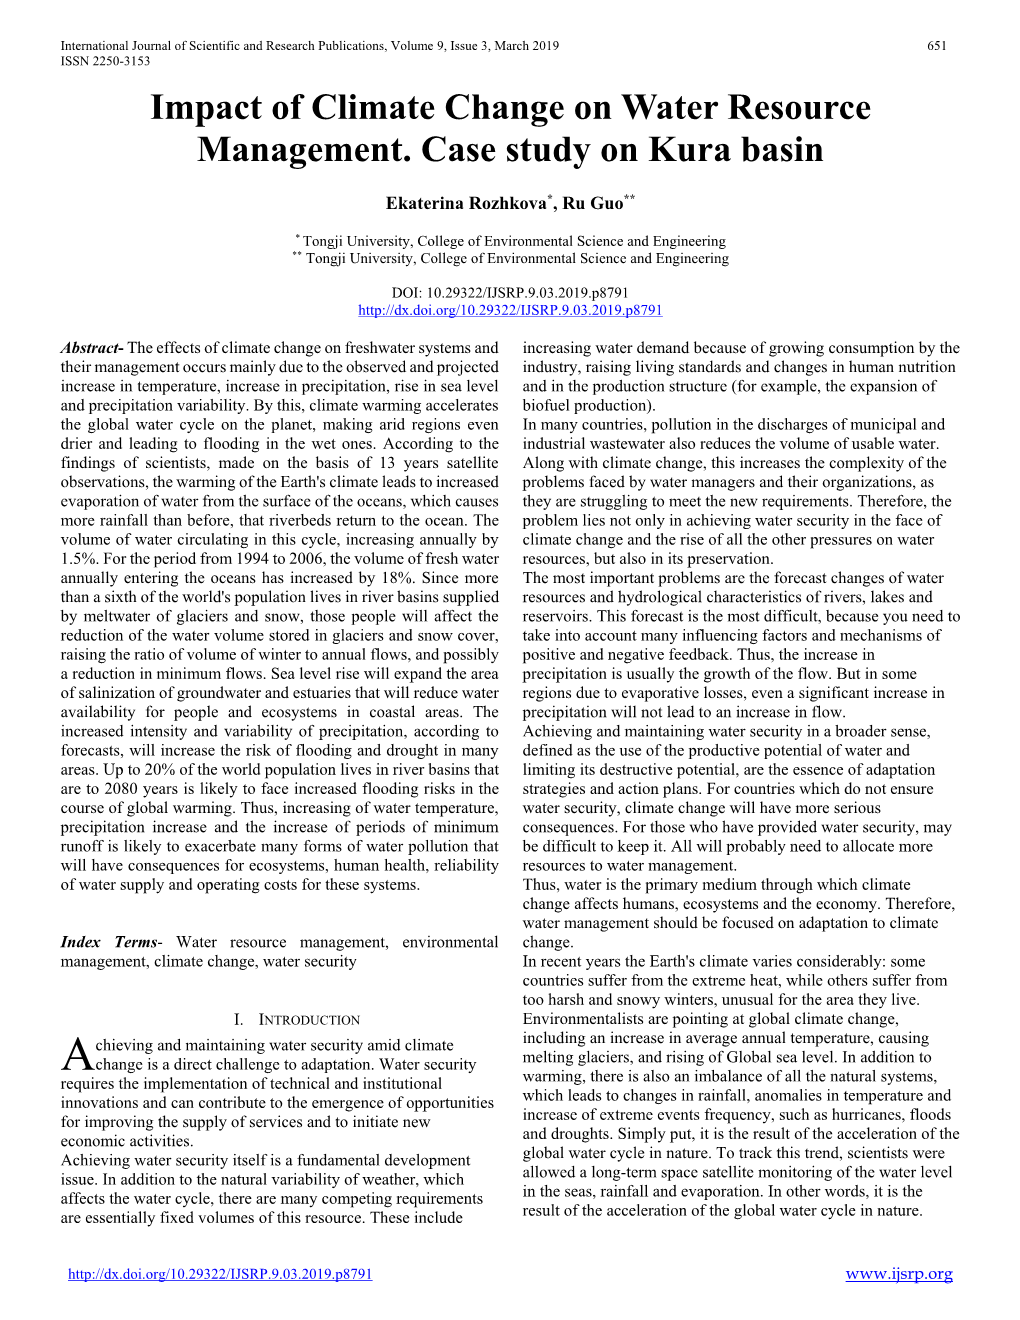 Impact of Climate Change on Water Resource Management. Case Study on Kura Basin